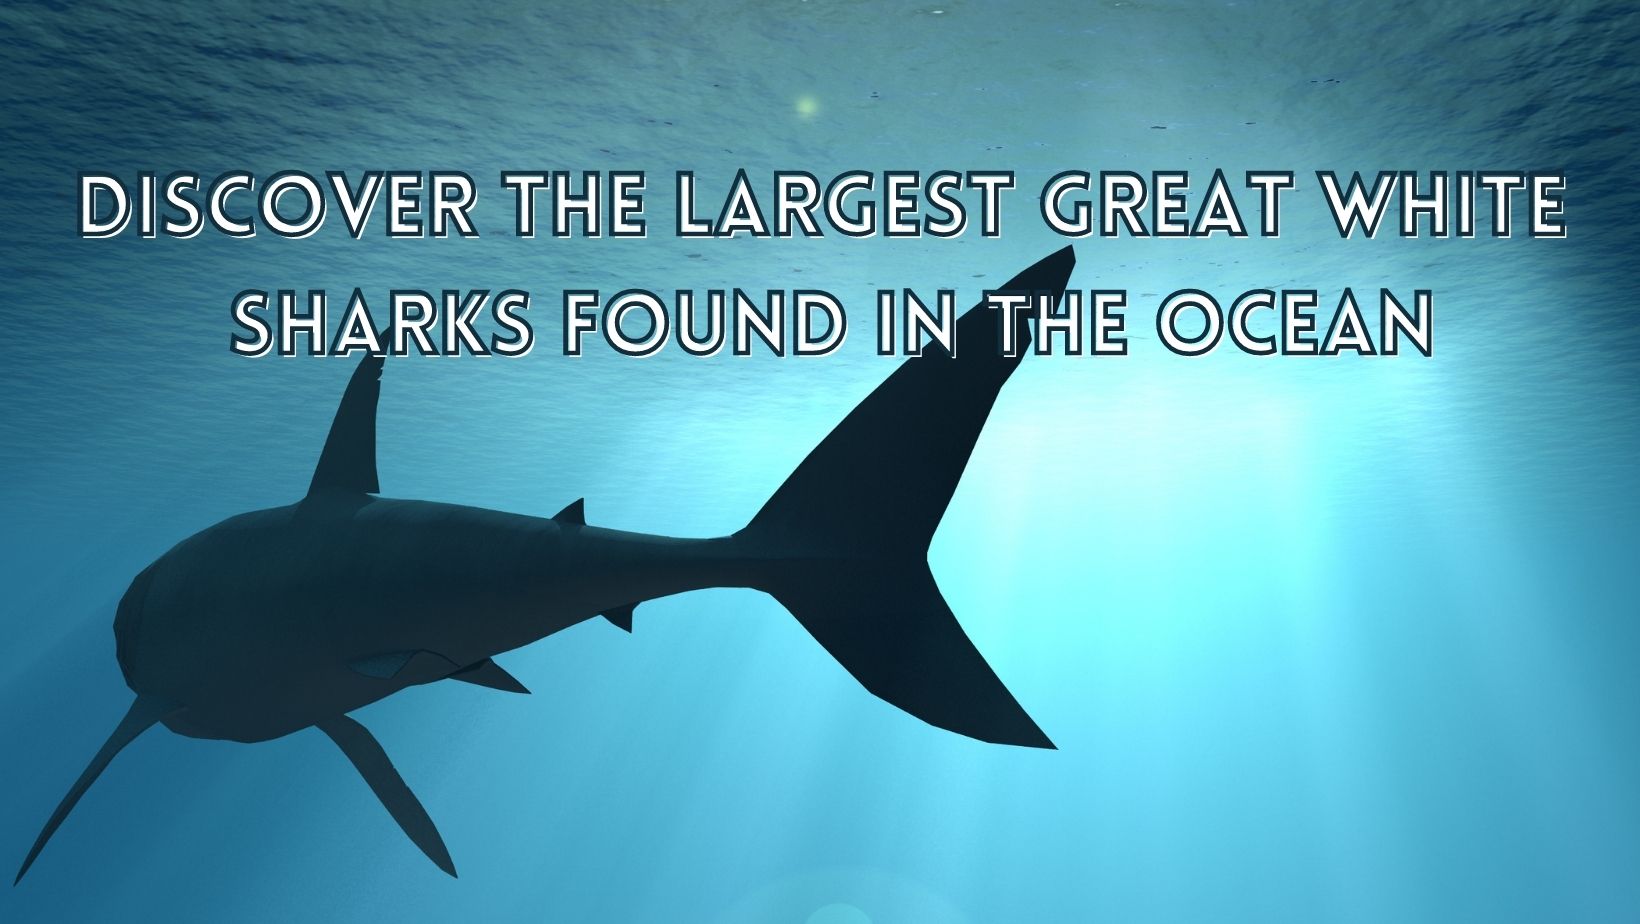 Largest great white sharks